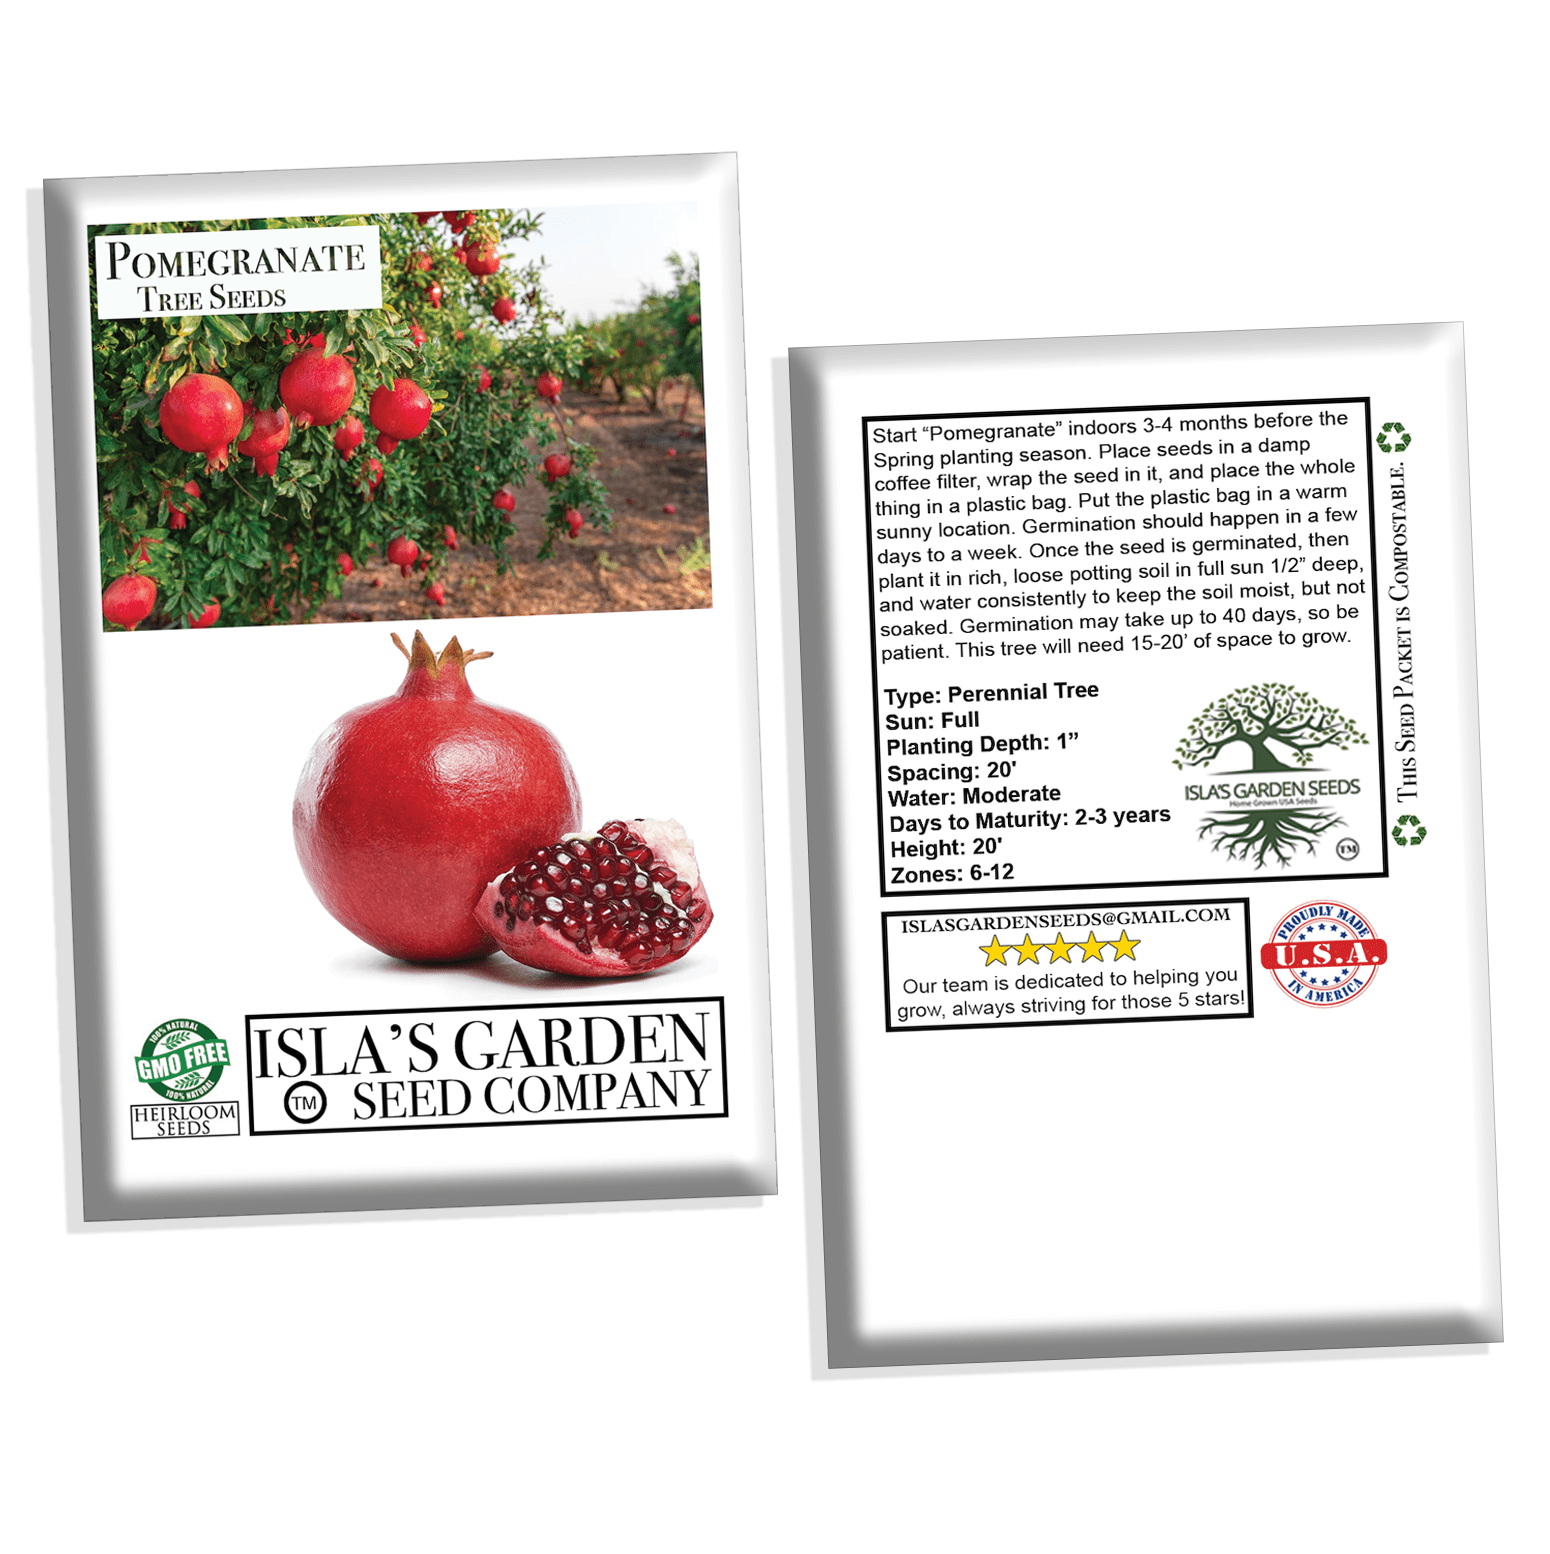 Pomegranate Tree Seeds for Planting, 30+ Fruit Tree Seeds, Tall & Beautiful Tree, Isla's Garden Seeds , 85% Germination Rates, Great Home Garden Gift